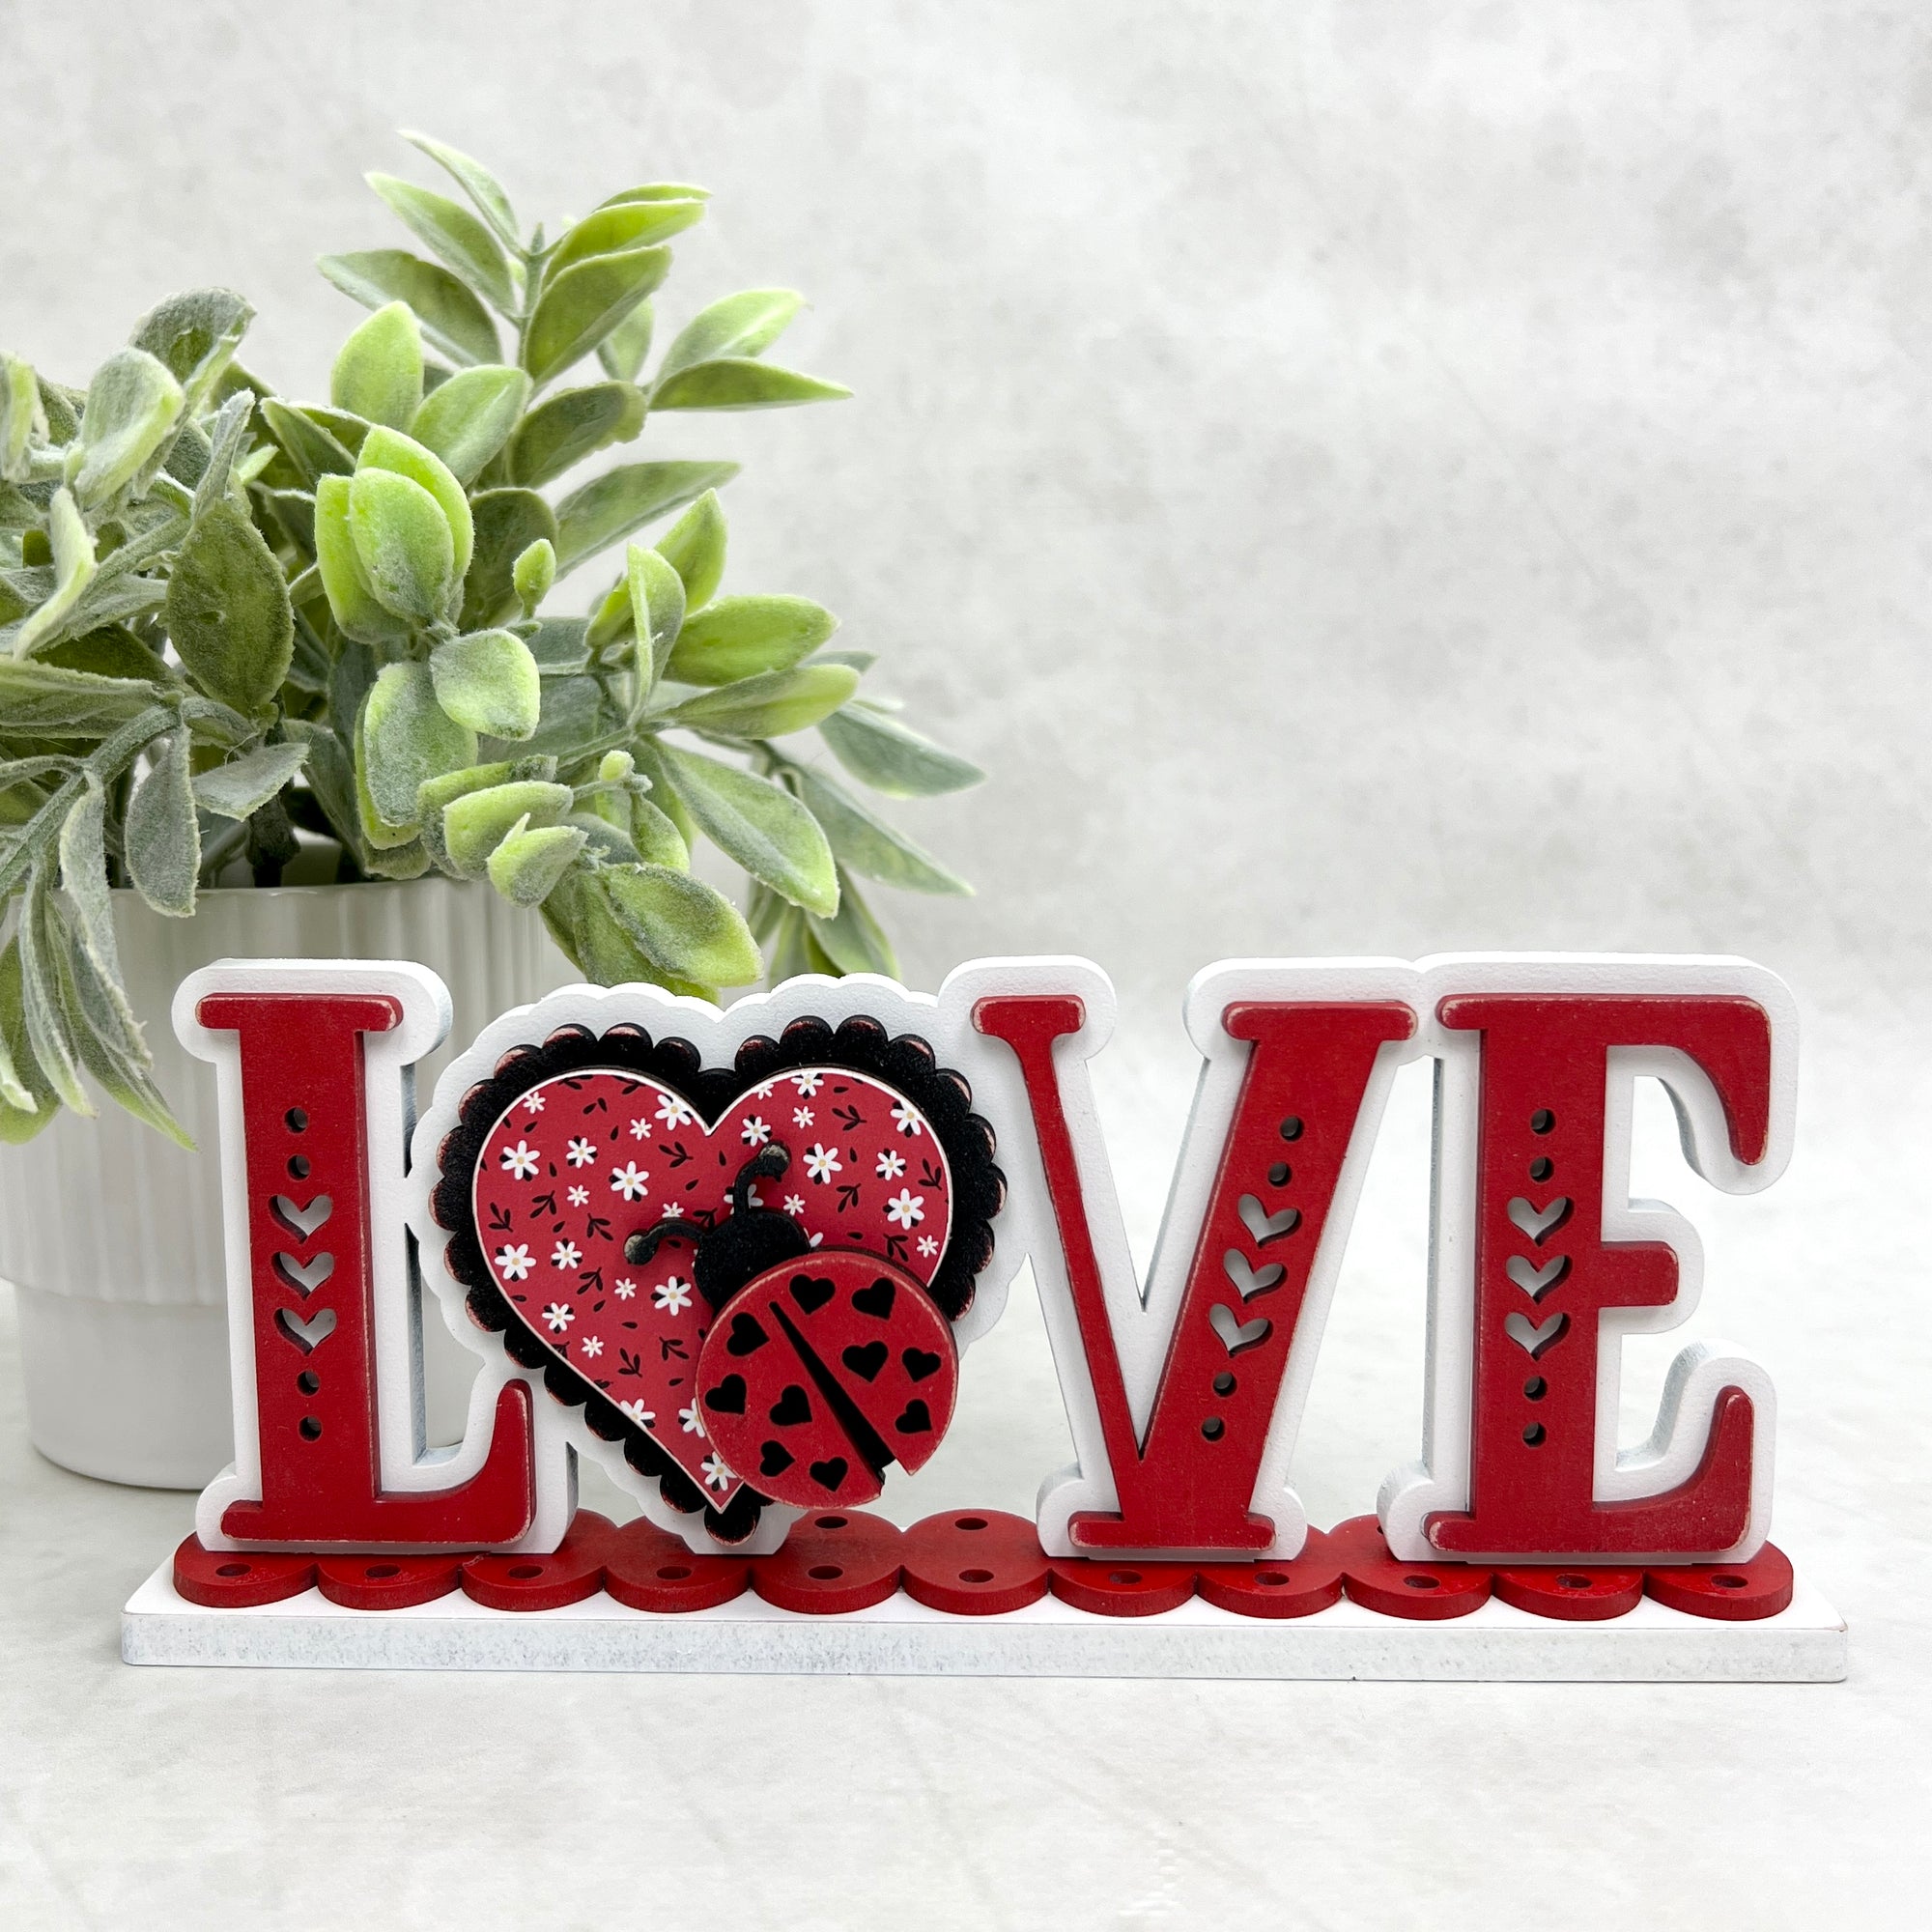 Love word wood decor DIY craft kit with heart and ladybug for valentines day and all year round.